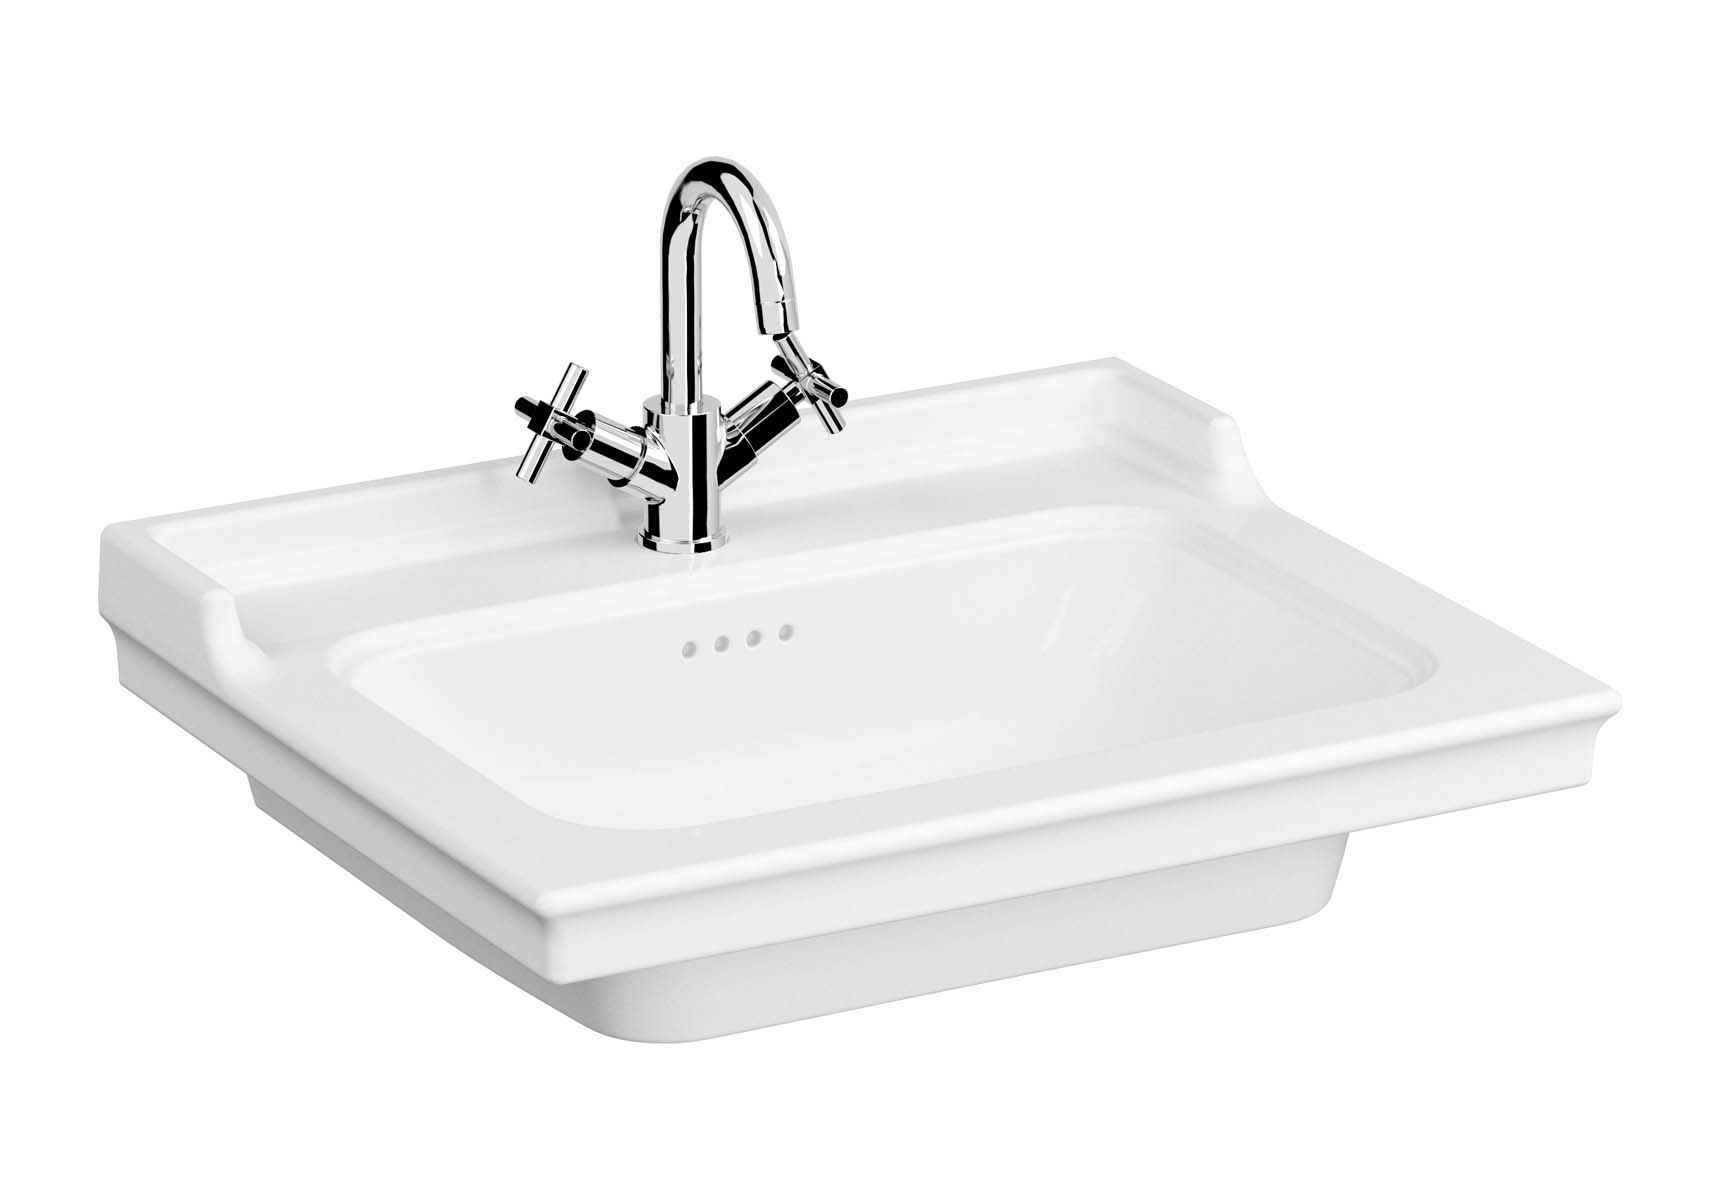 Vanity Basin, 65 cm, One Tap Hole, With Overflow Hole, With Metallic Legs